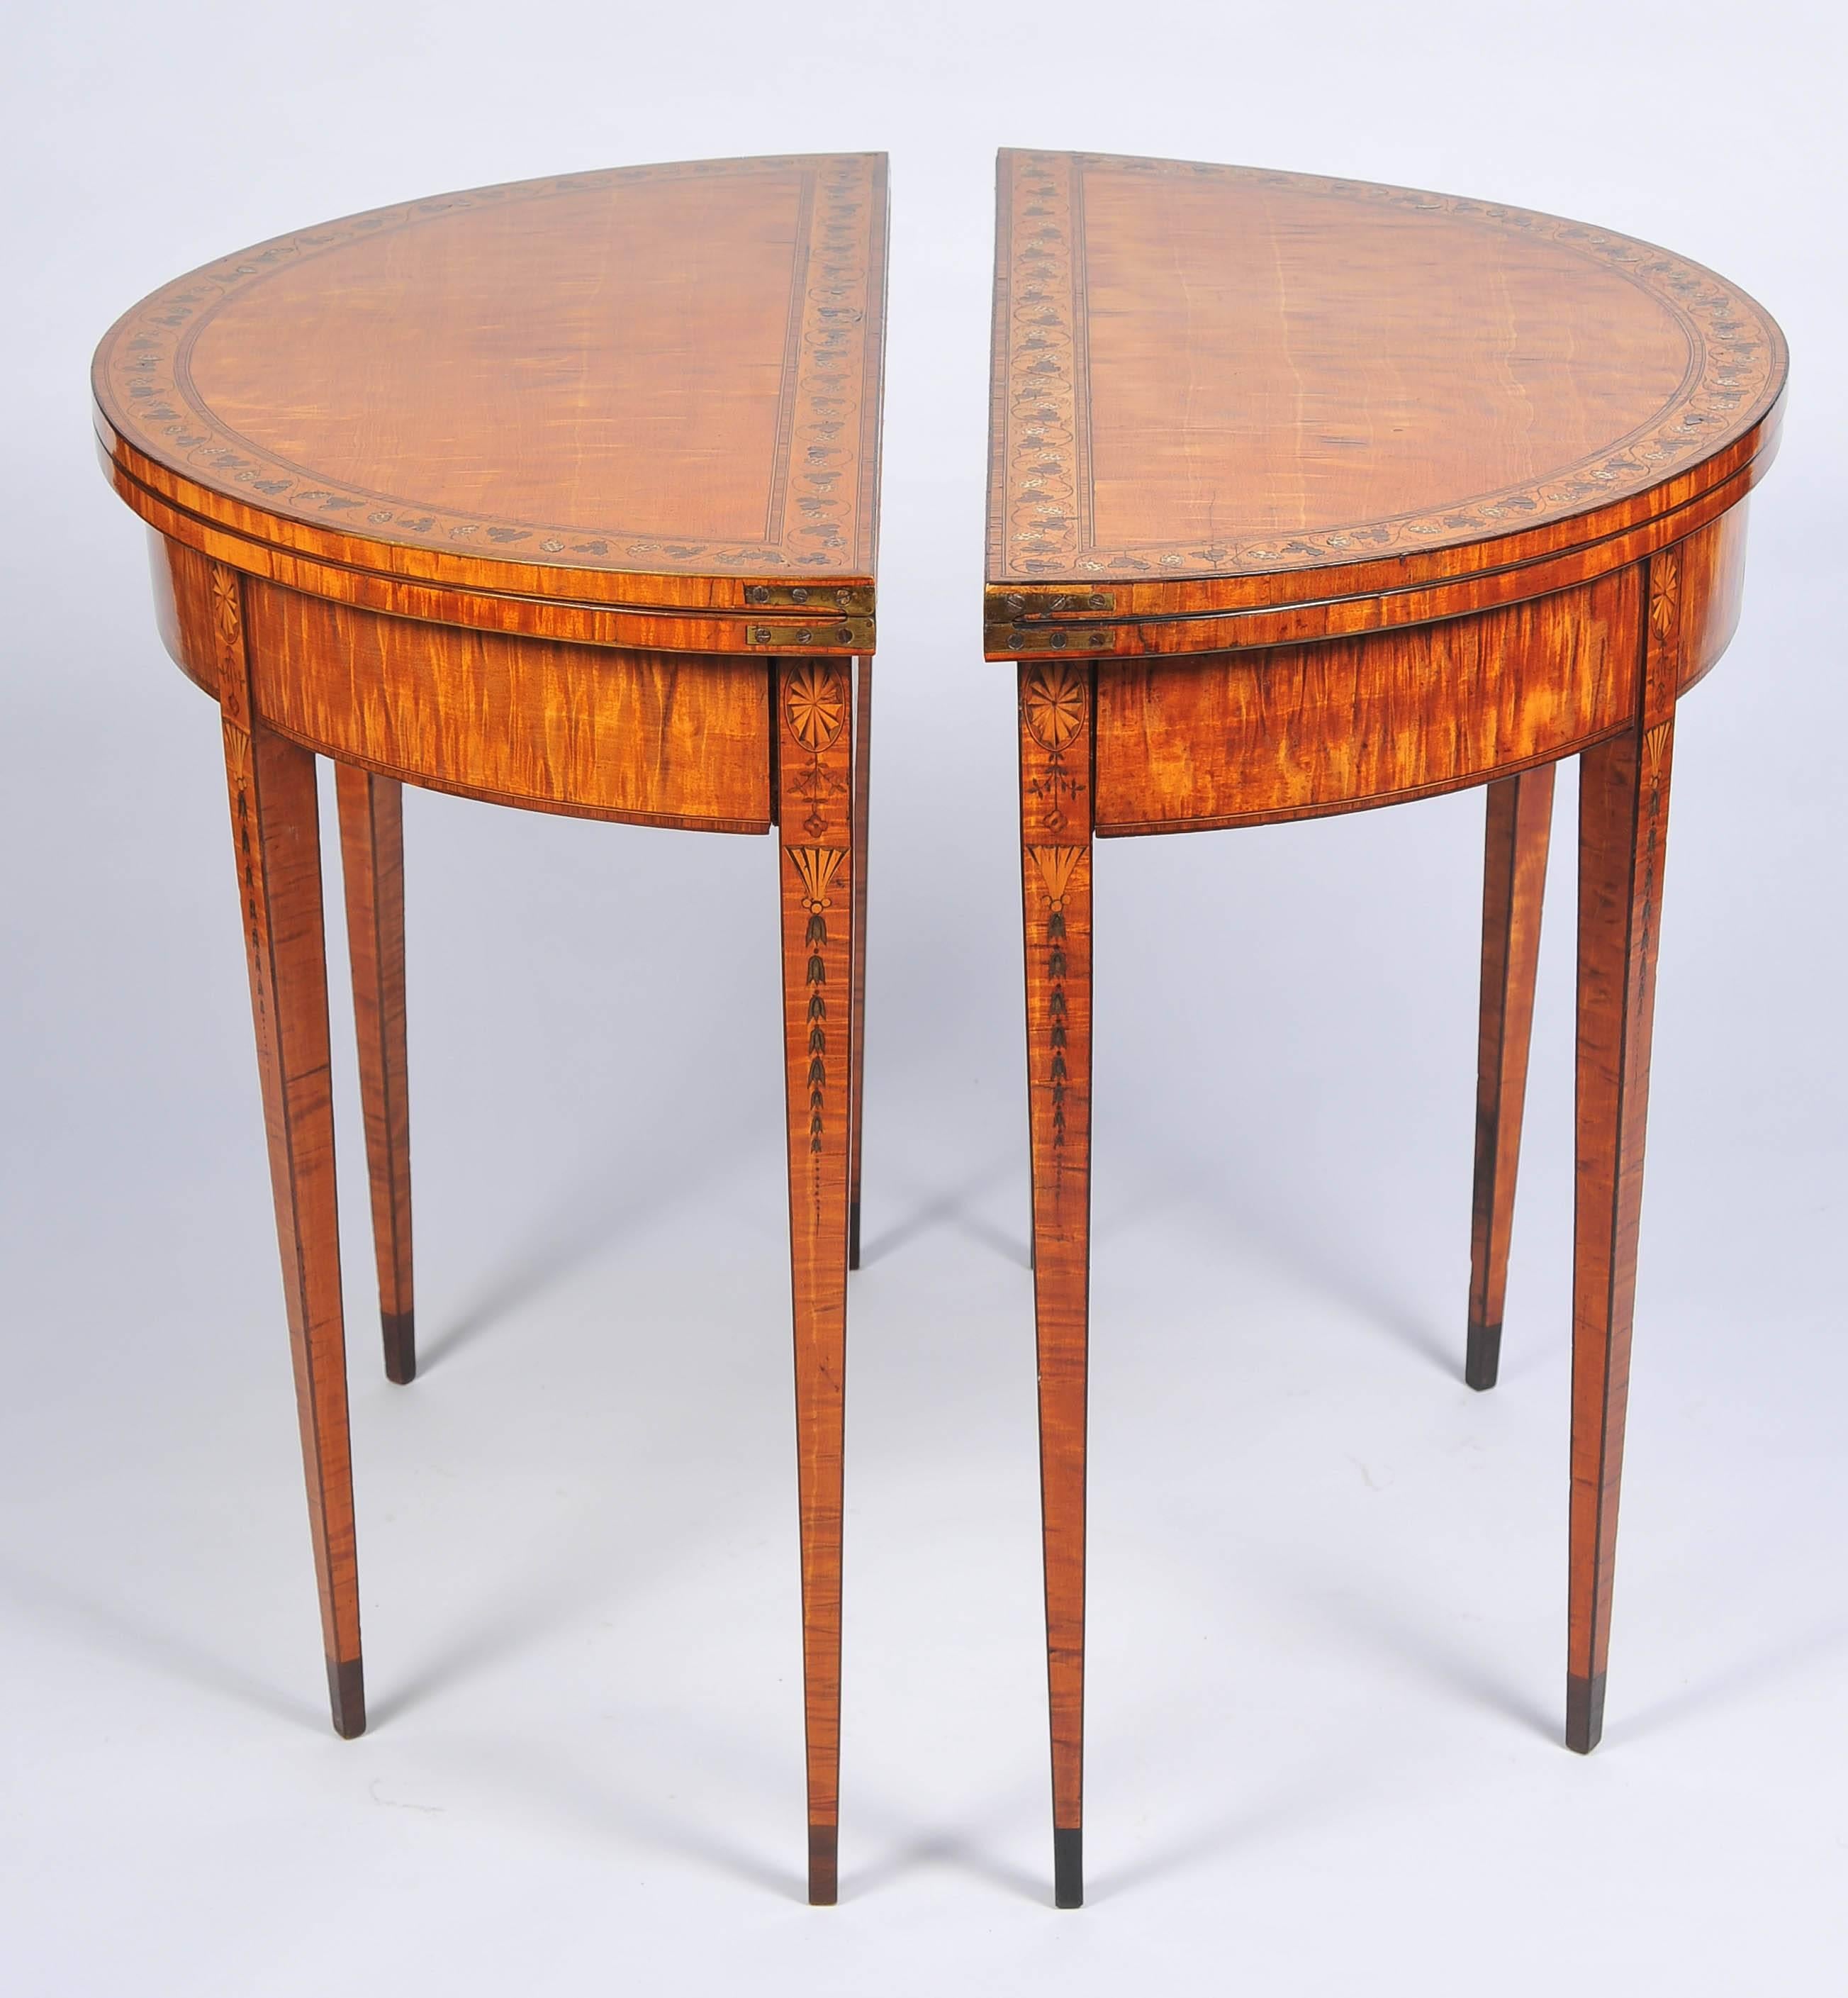 A fine quality pair of Sheraton period satinwood demilune card tables, having crossbanding to the tops of vine leaves and grapes, raised on square tapering legs, inlaid with shell and leaves, terminating in ebony veneered feet.
 